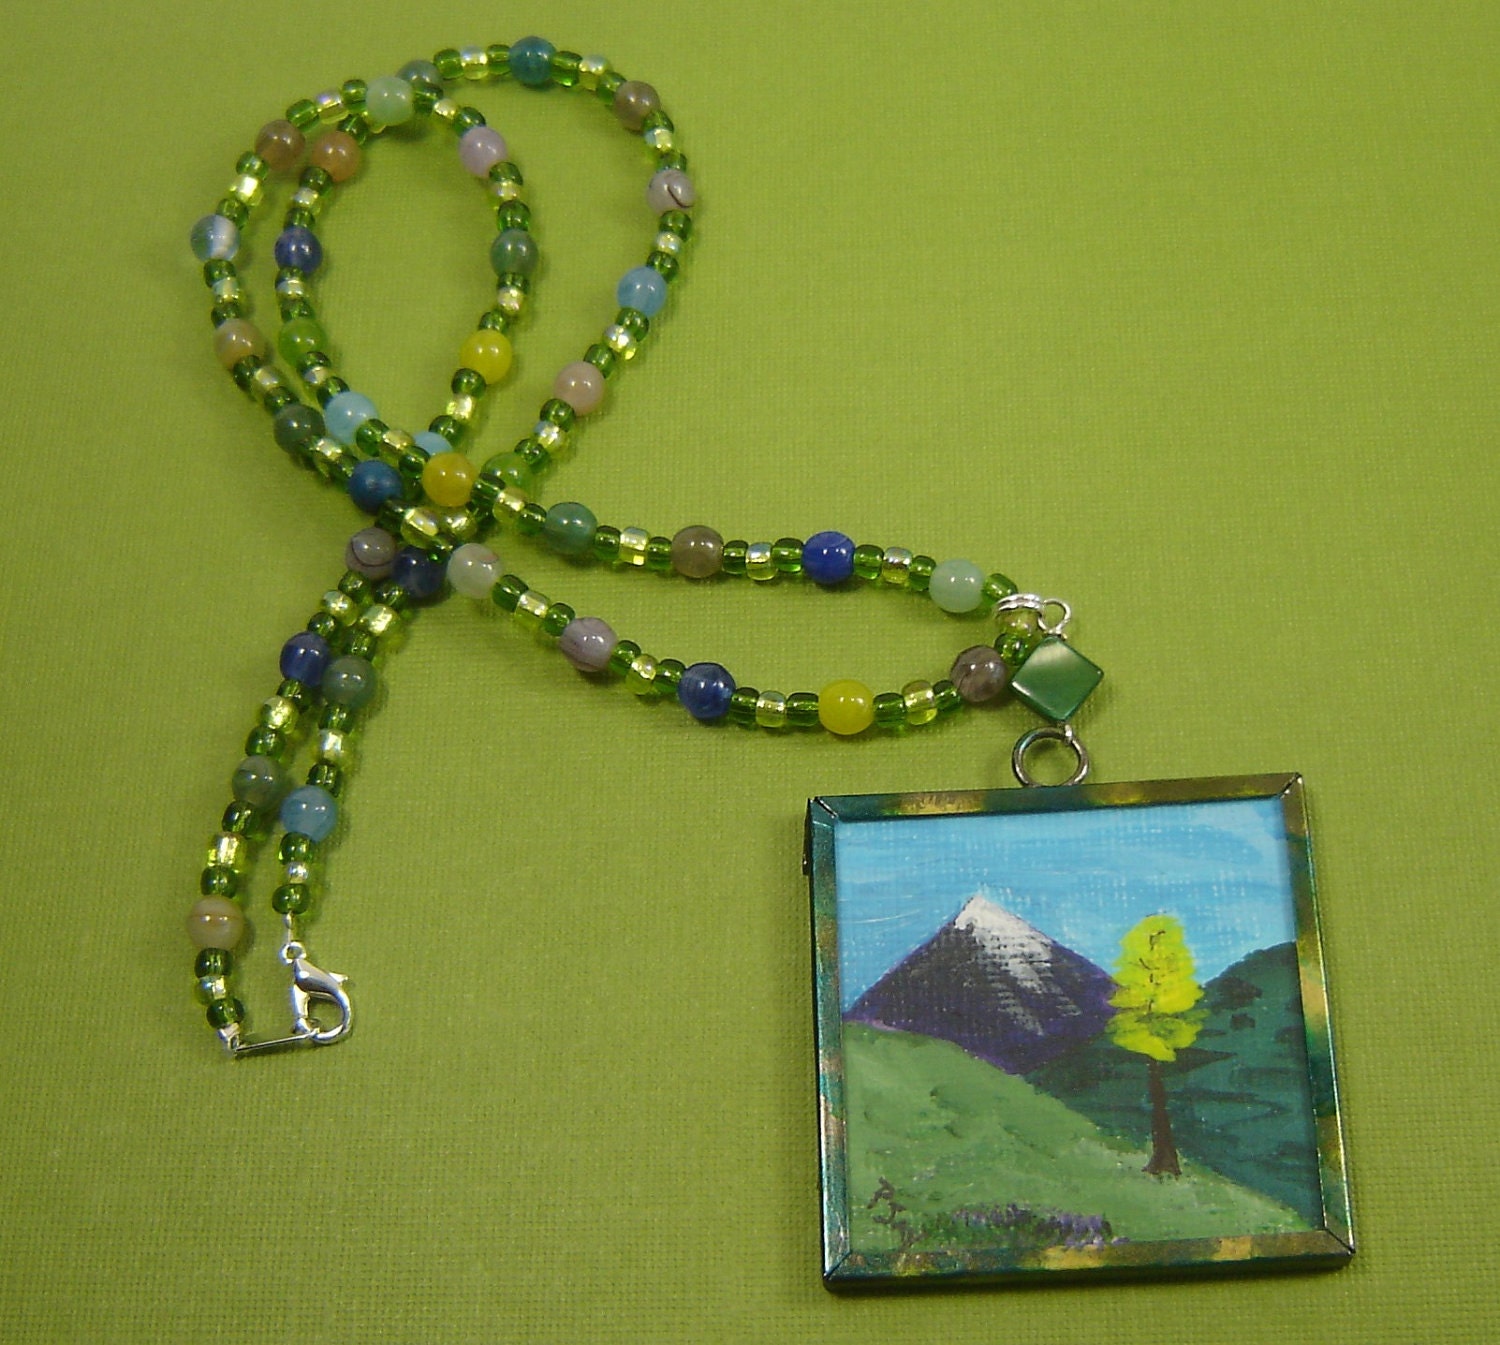 Mountain painting in metal frame necklace